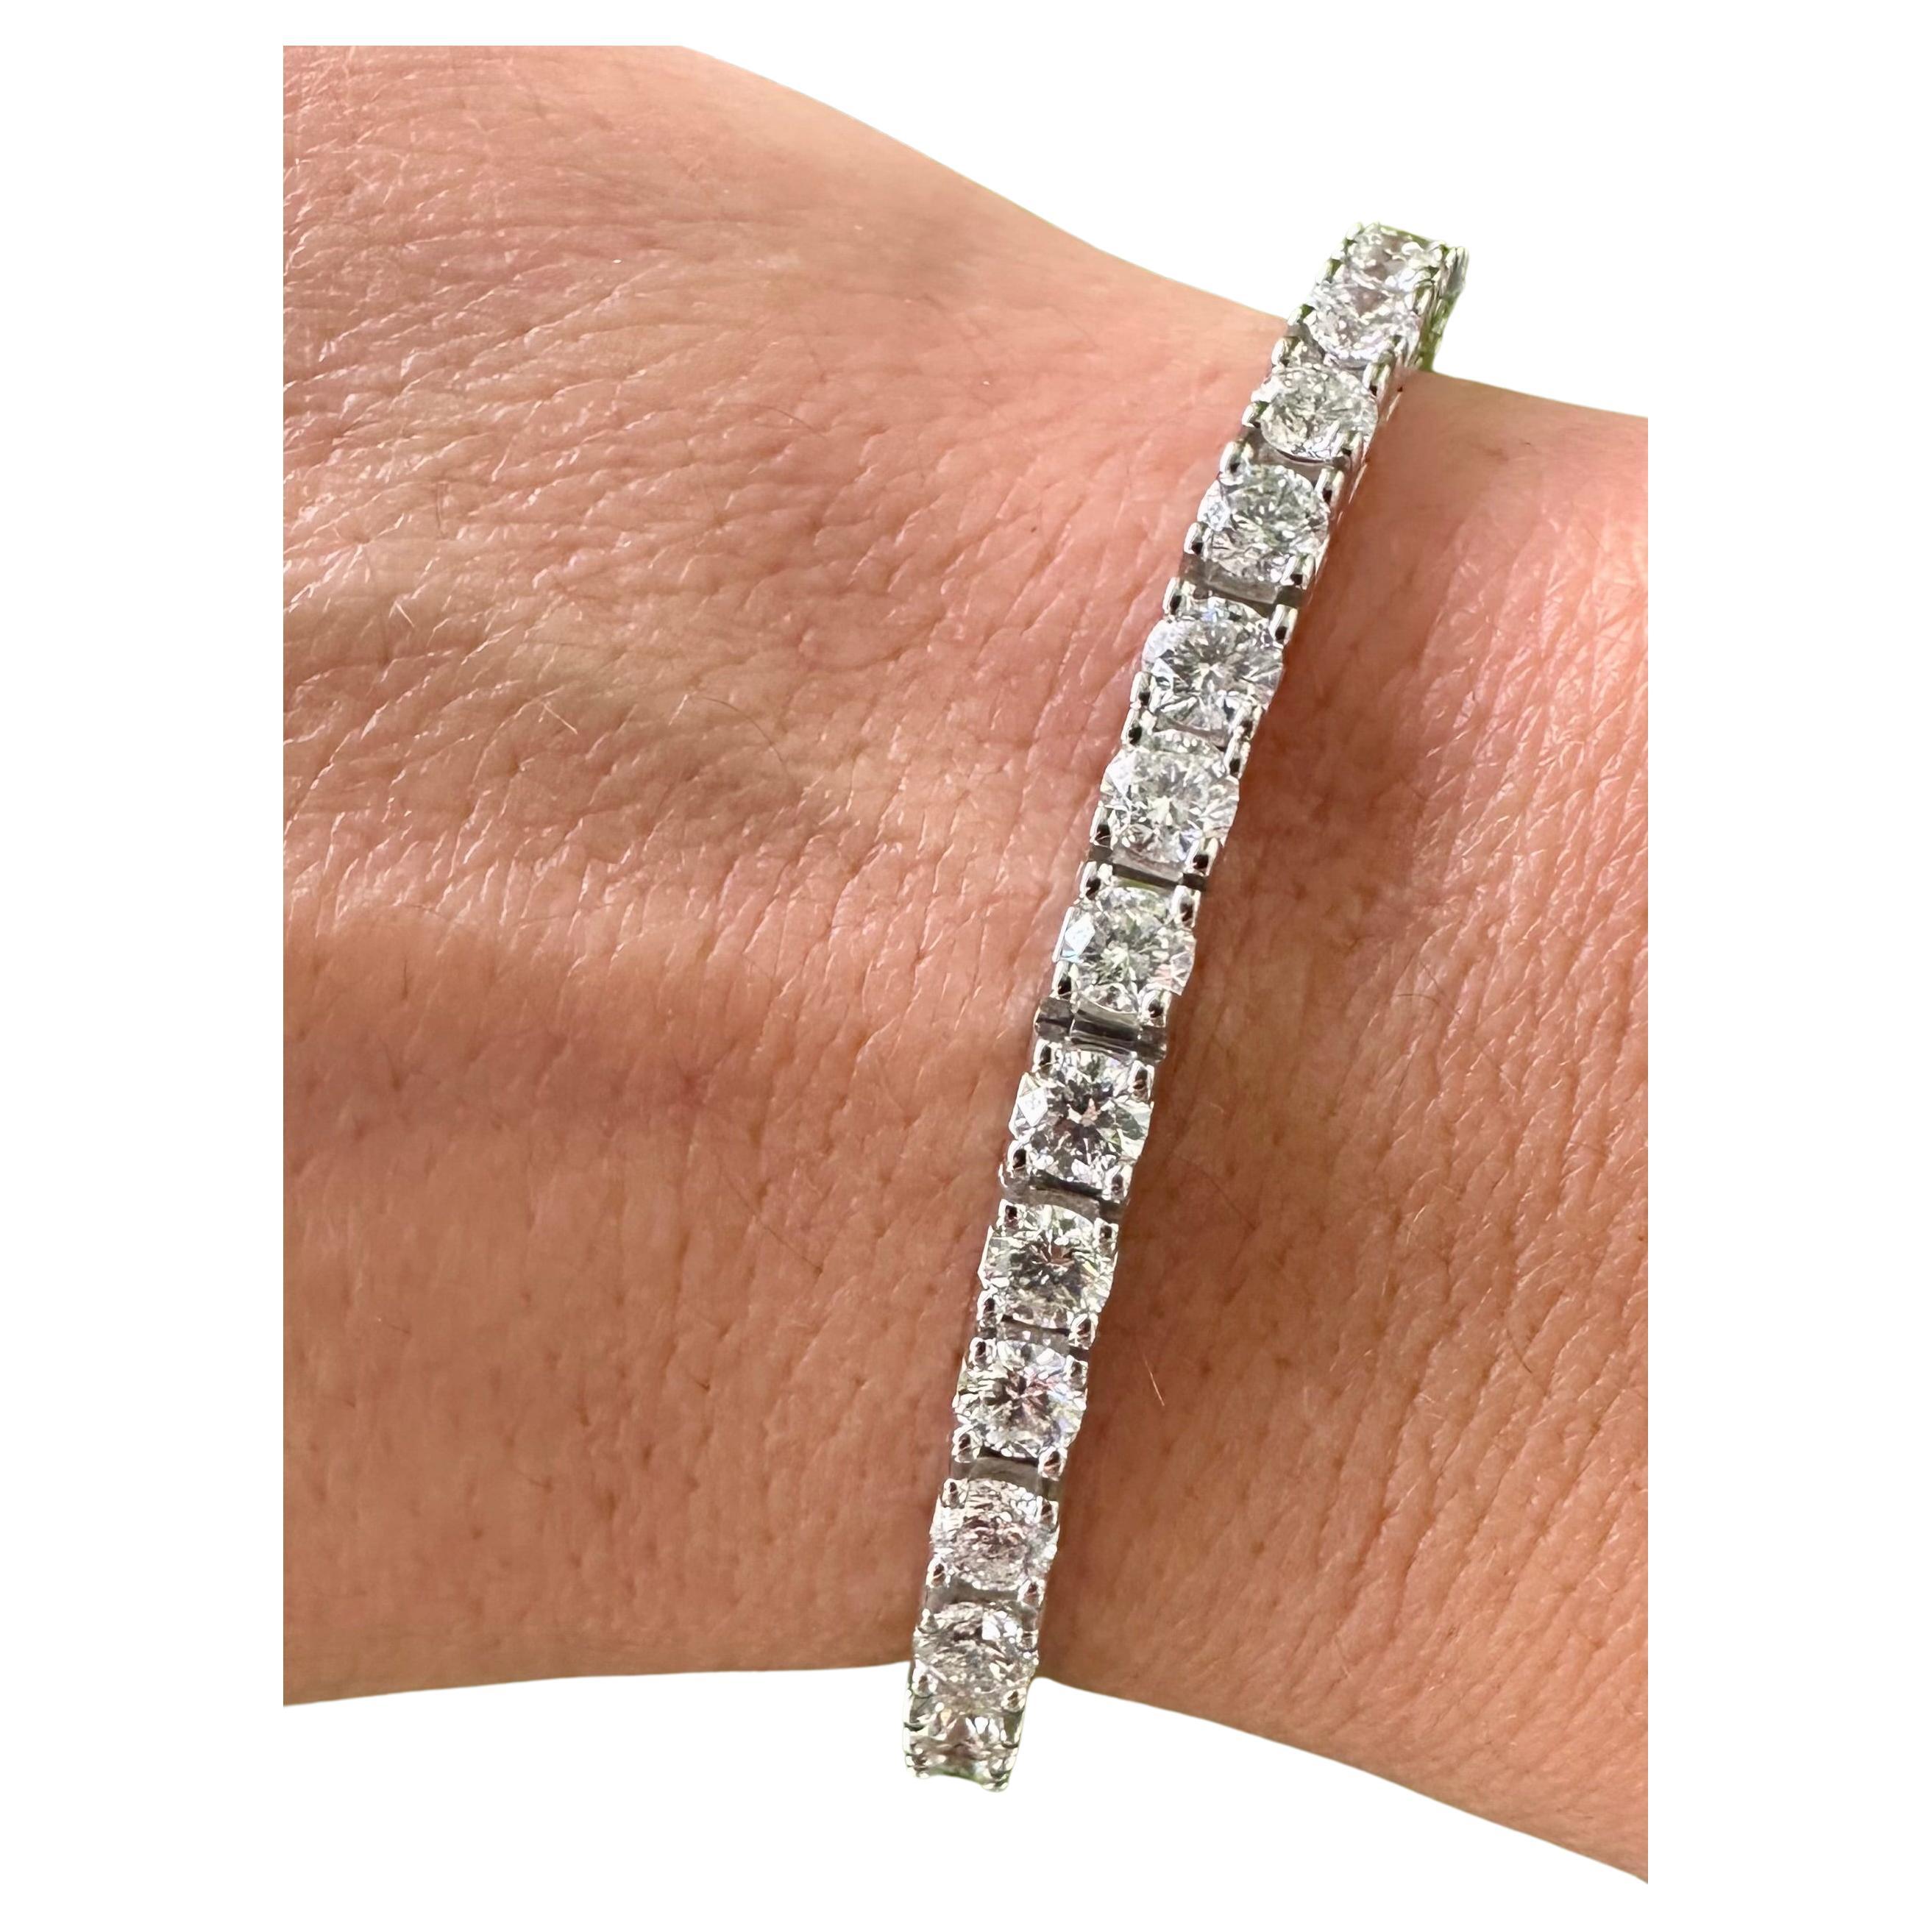 10 Carat Diamond Tennis Bracelet With 25 Points Each in 18k White Gold at  1stDibs